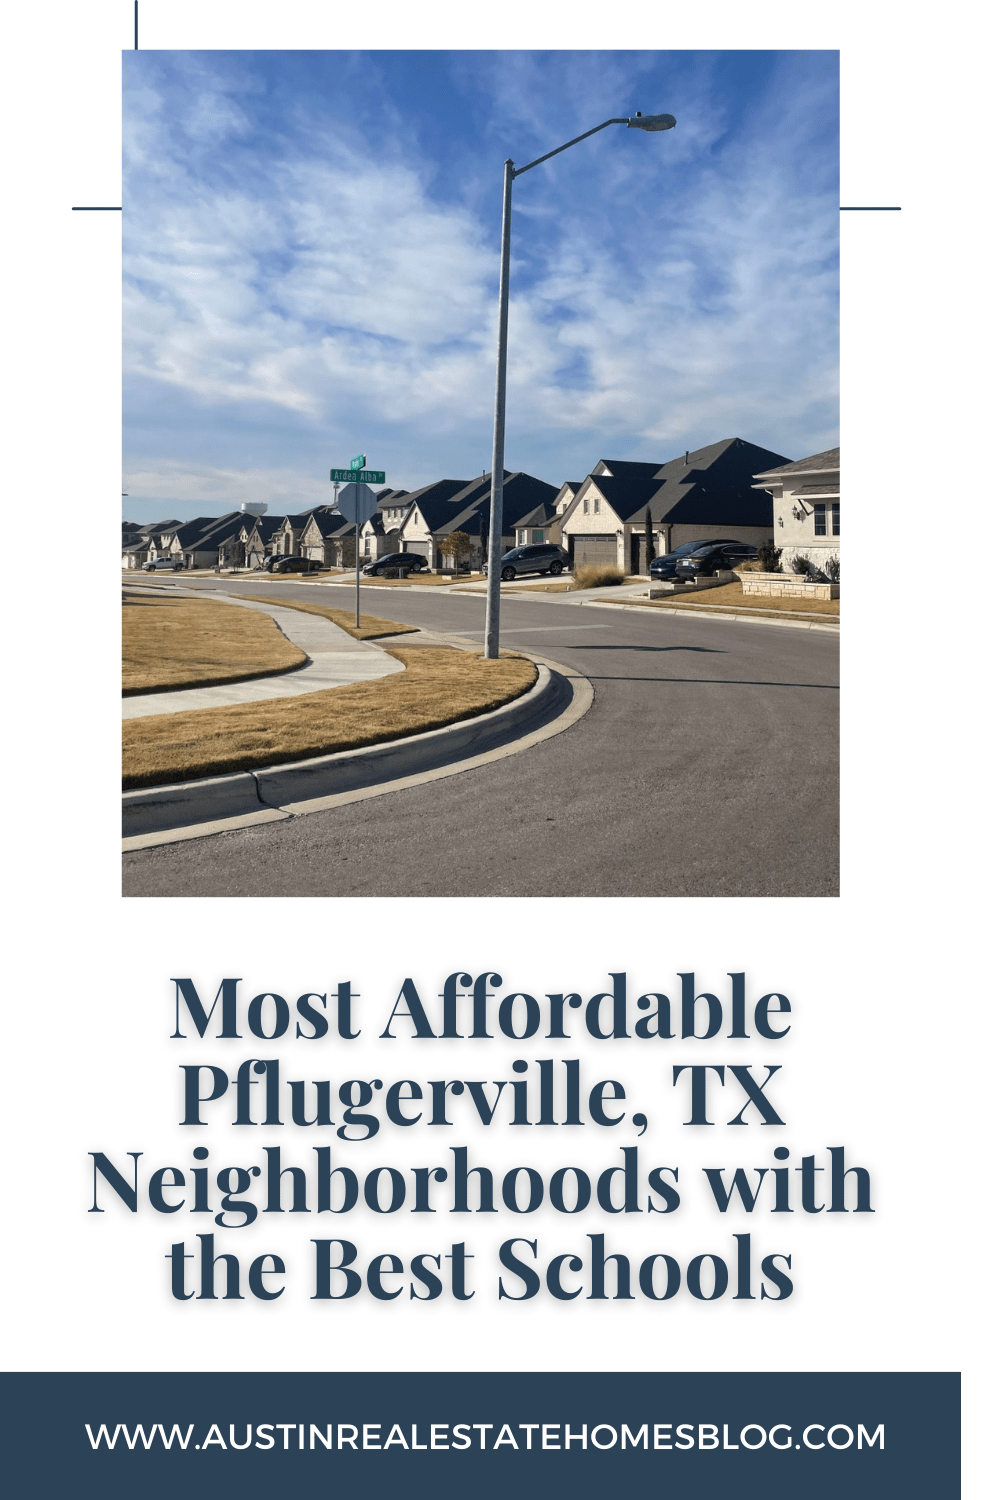 most affordable Pflugerville TX neighborhoods with the best schools